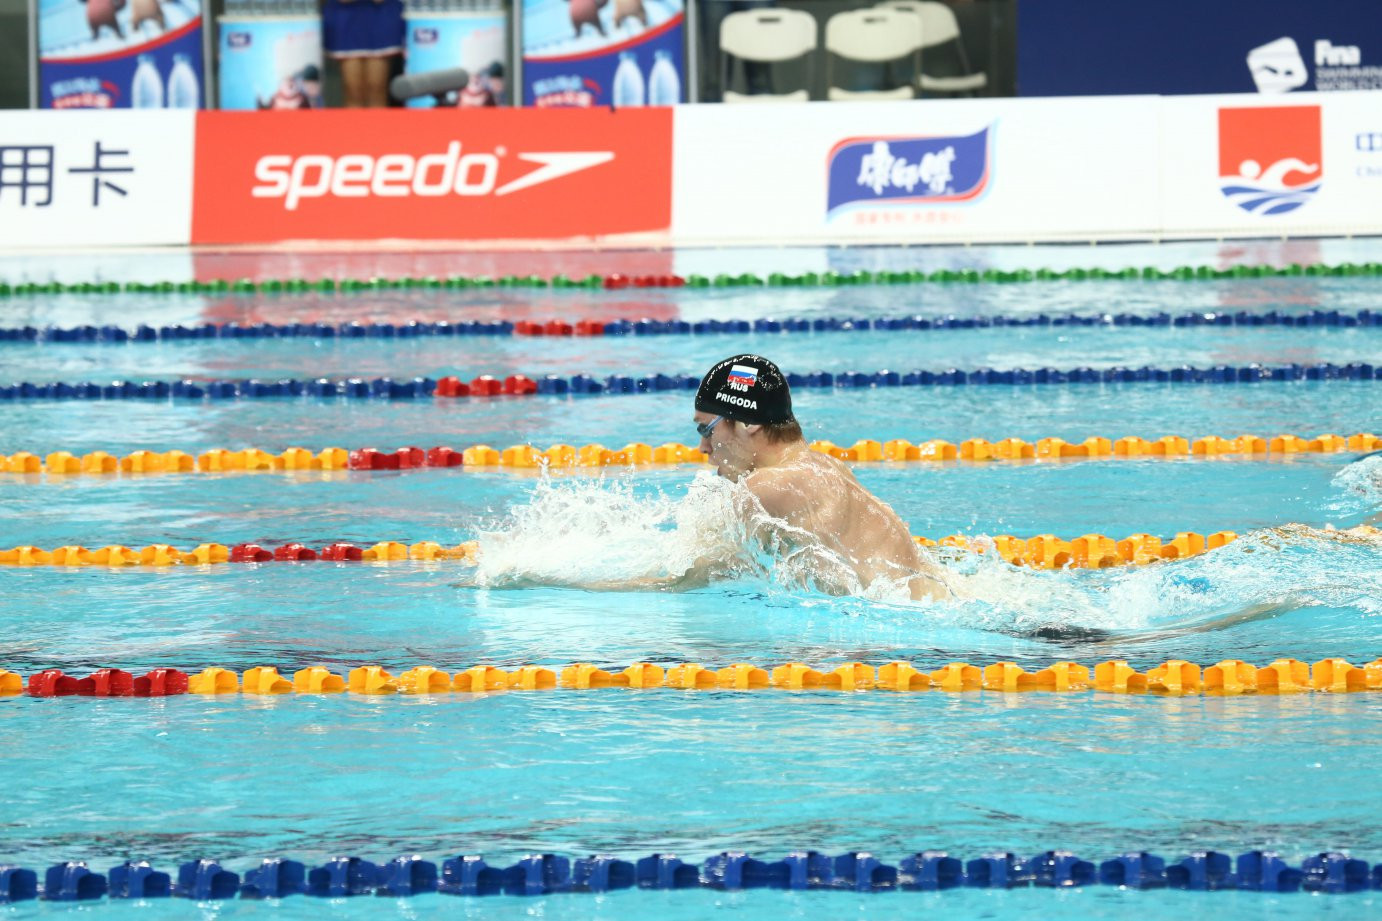 Russia's Vladimir Morozov finished with a golden flourish at the FINA Swimming World Cup in Beijing ©FINA